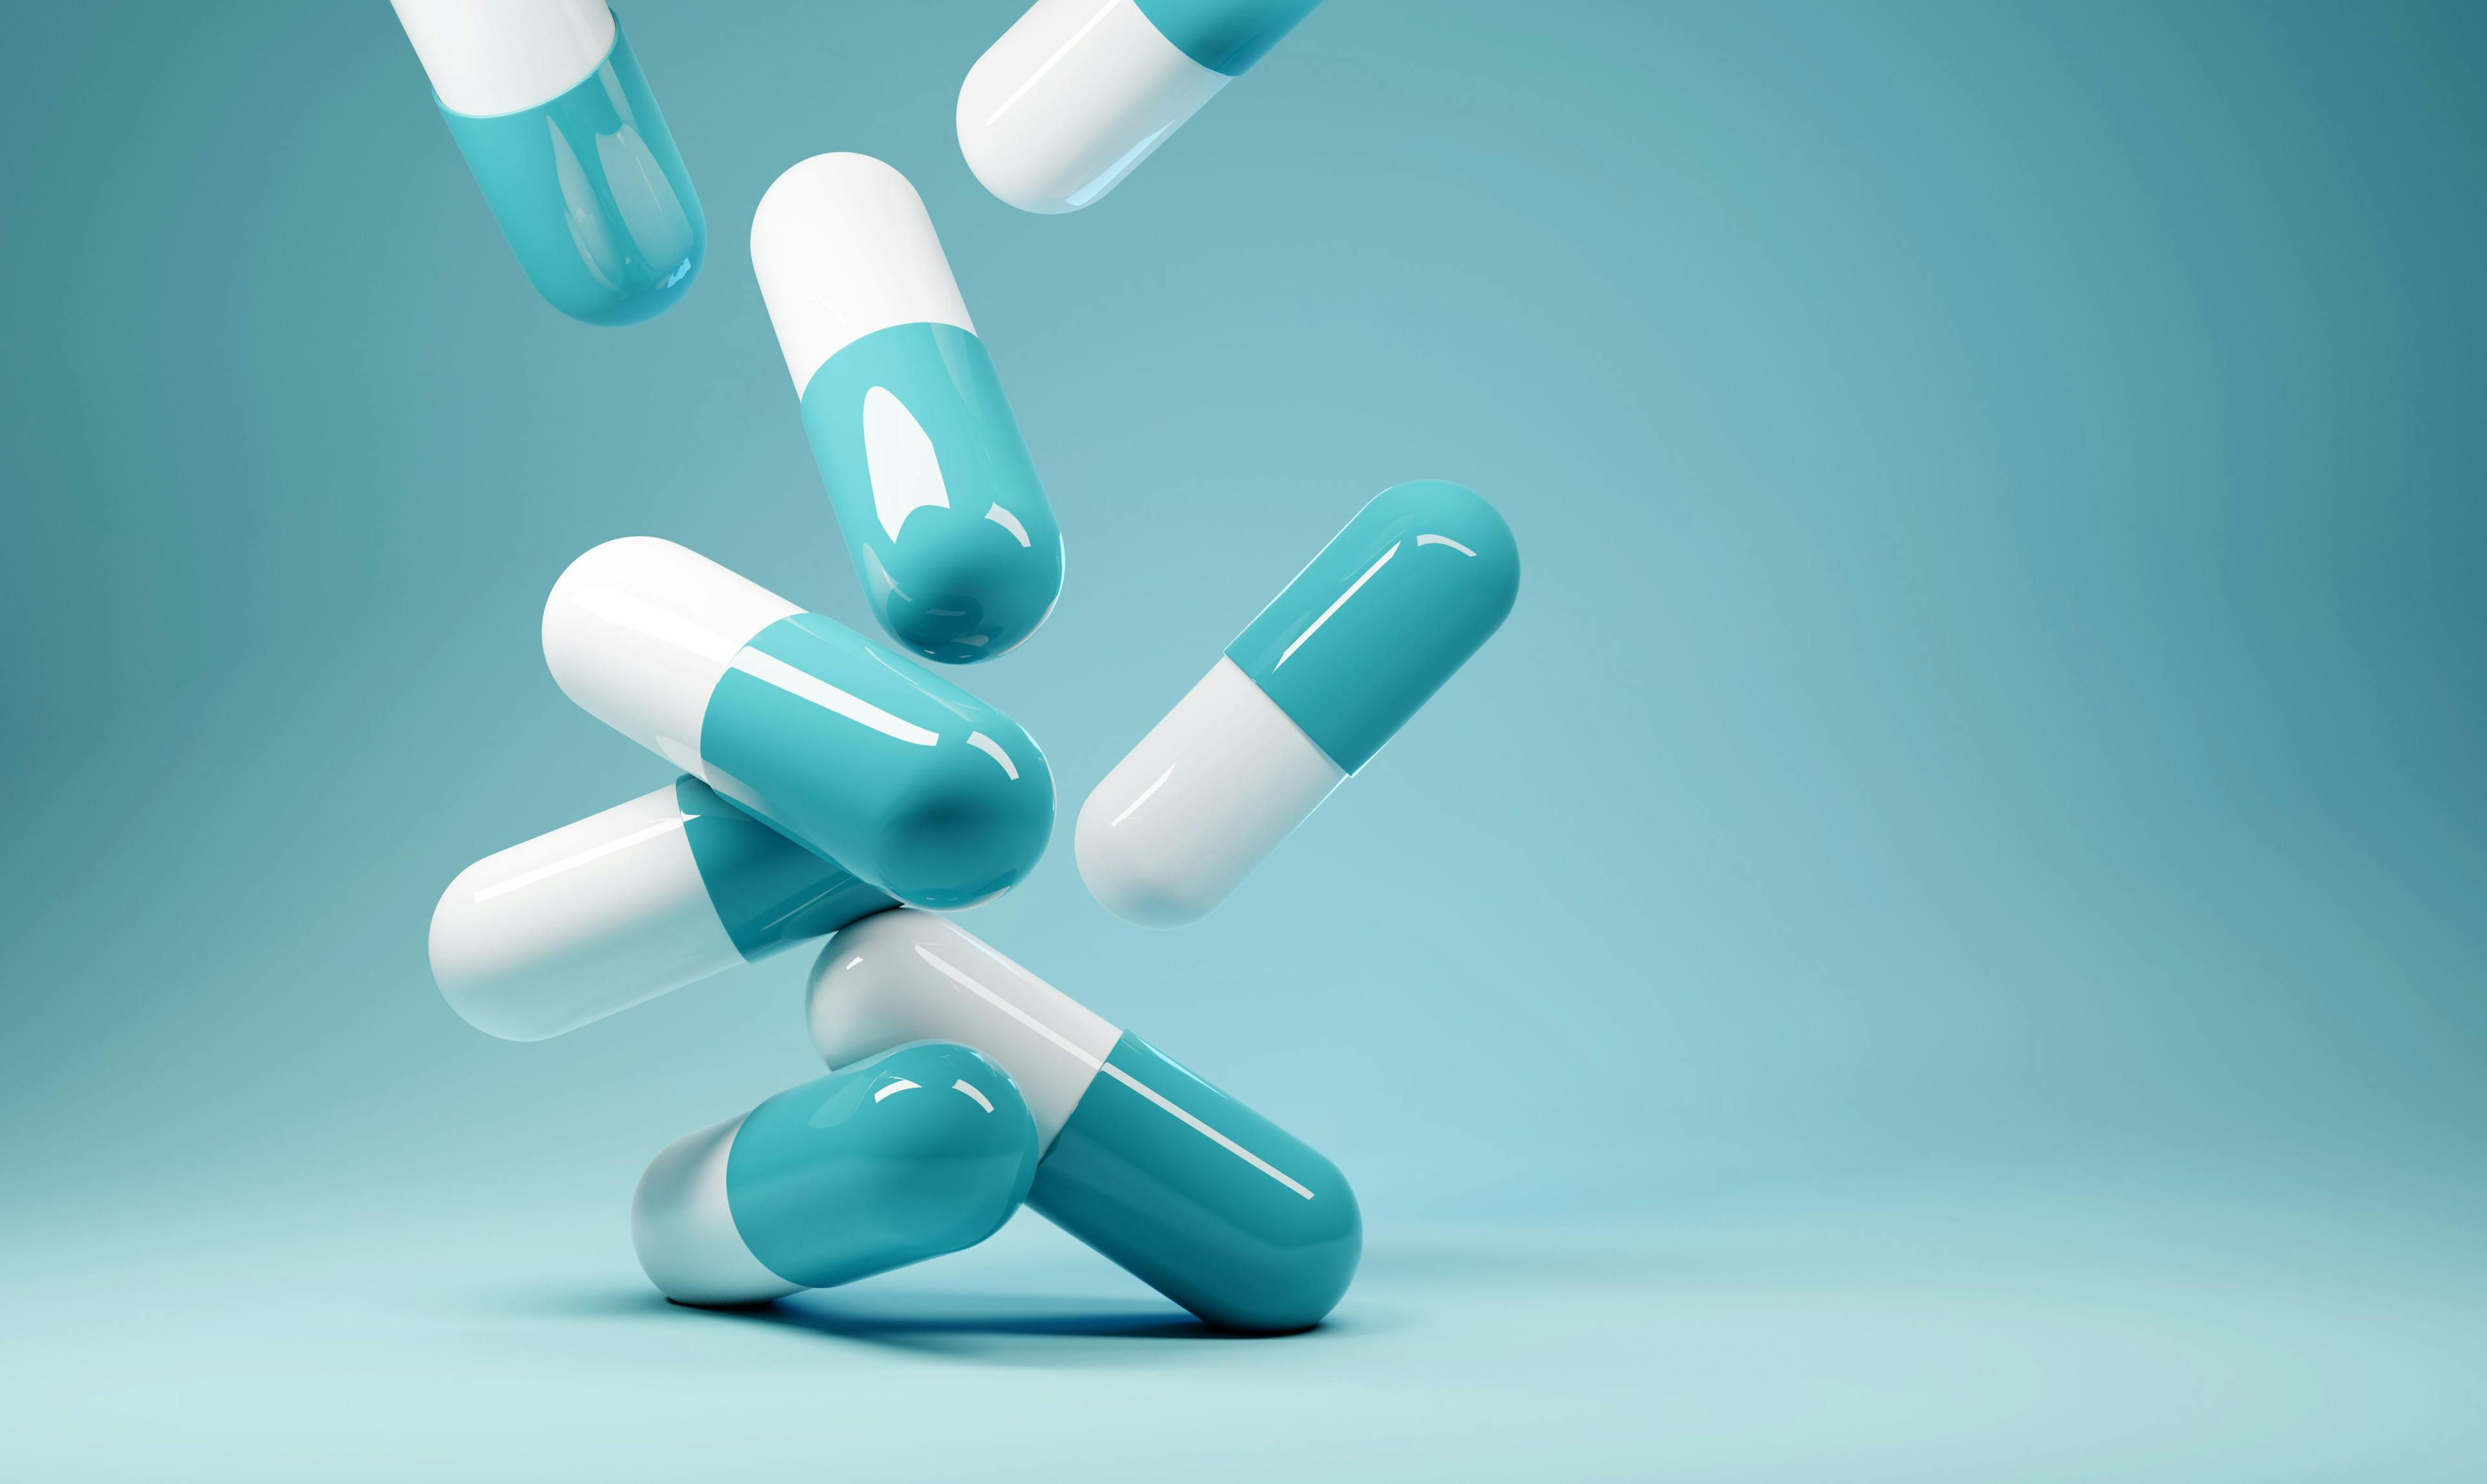 A group of antibiotic pill capsules falling. Healthcare and medical 3D illustration background. | Image credit: James Thew - stock.adobe.com